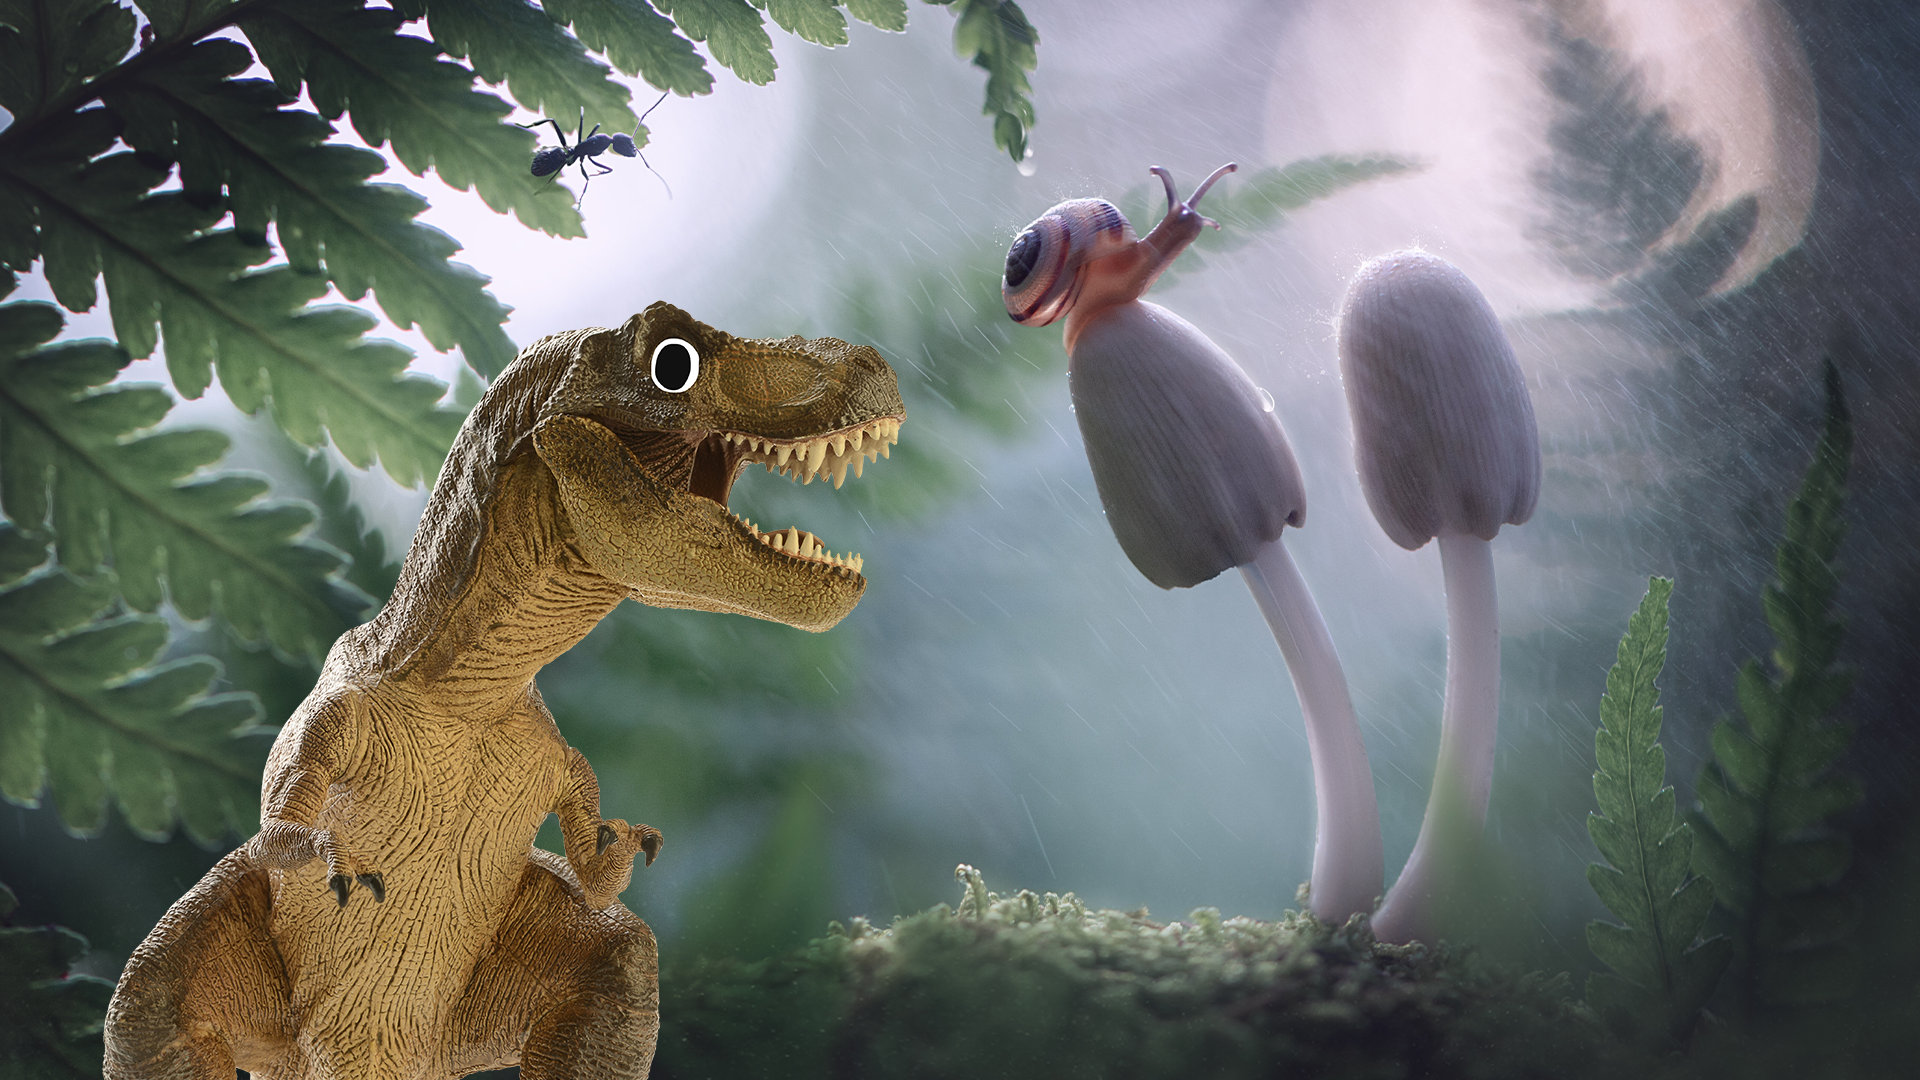 Dinosaur and mushroom and snail in magical forest